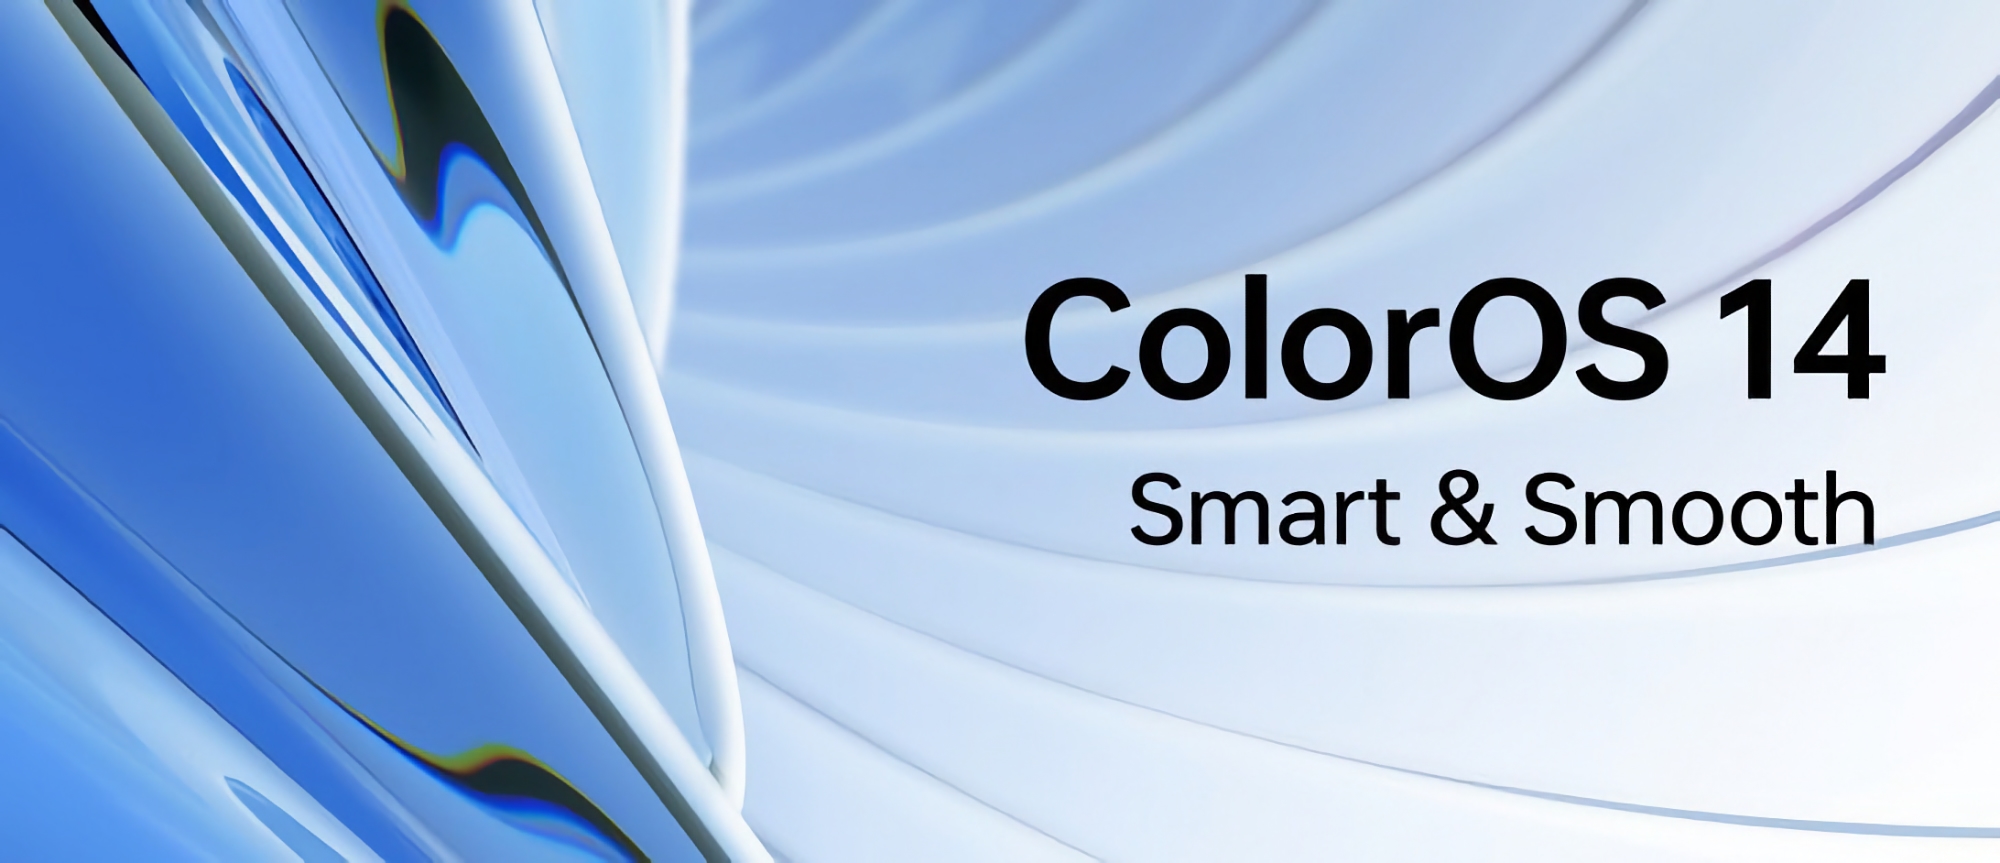 When and which OPPO devices will receive ColorOS 14 in the global marketplace